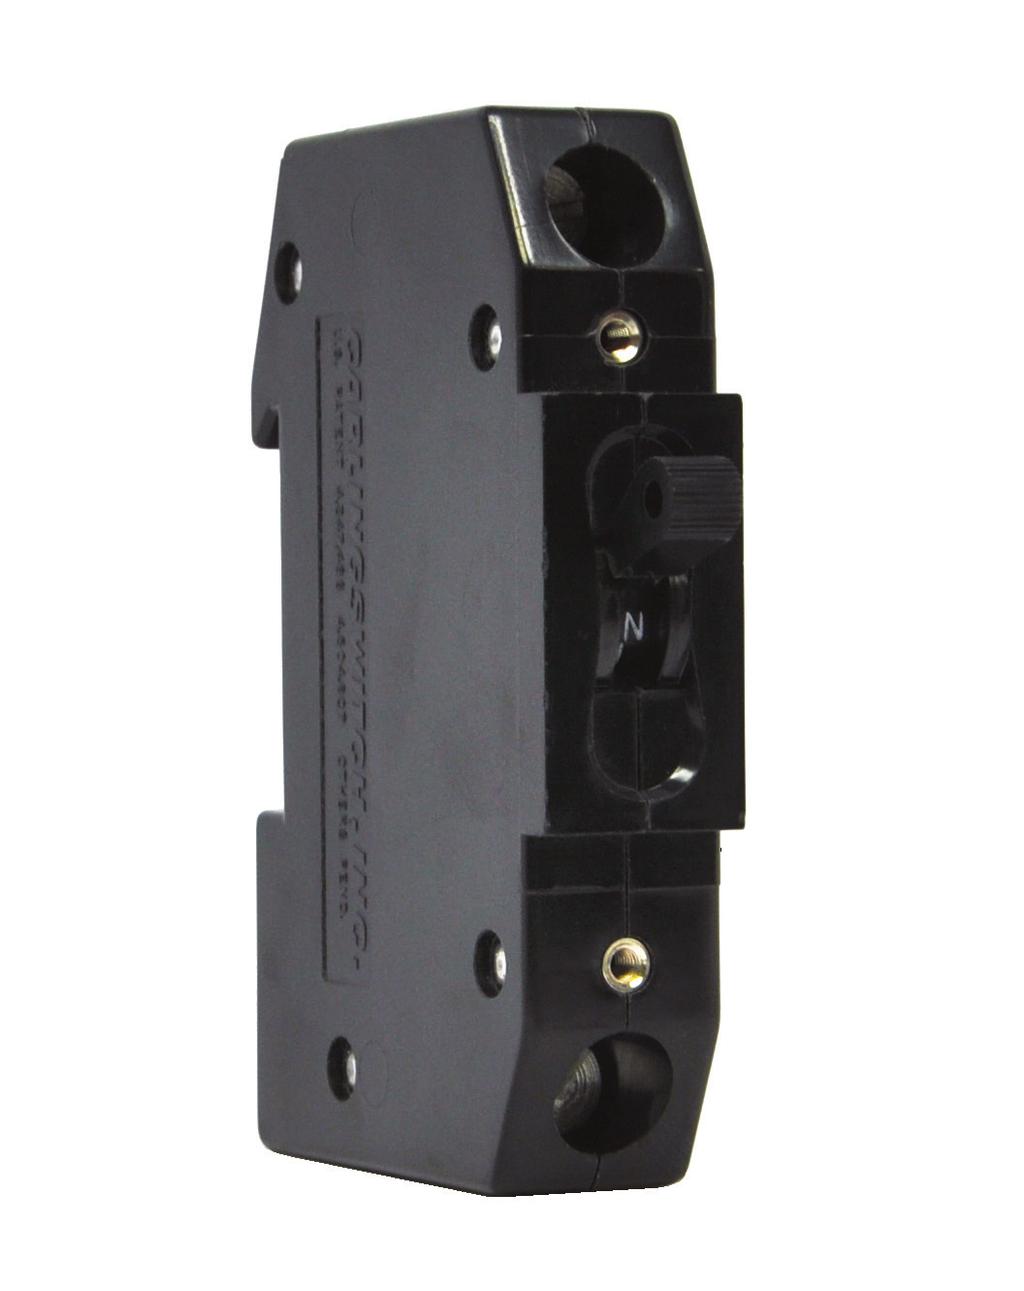 D-Series Circuit Breaker Designed for snap-on-back panel rail mounting on either a 35mm x 7.5mm, or a 35mm x 15mm Symmetrical Din Rail, allowing rapid and simple mounting and removal of the breaker.